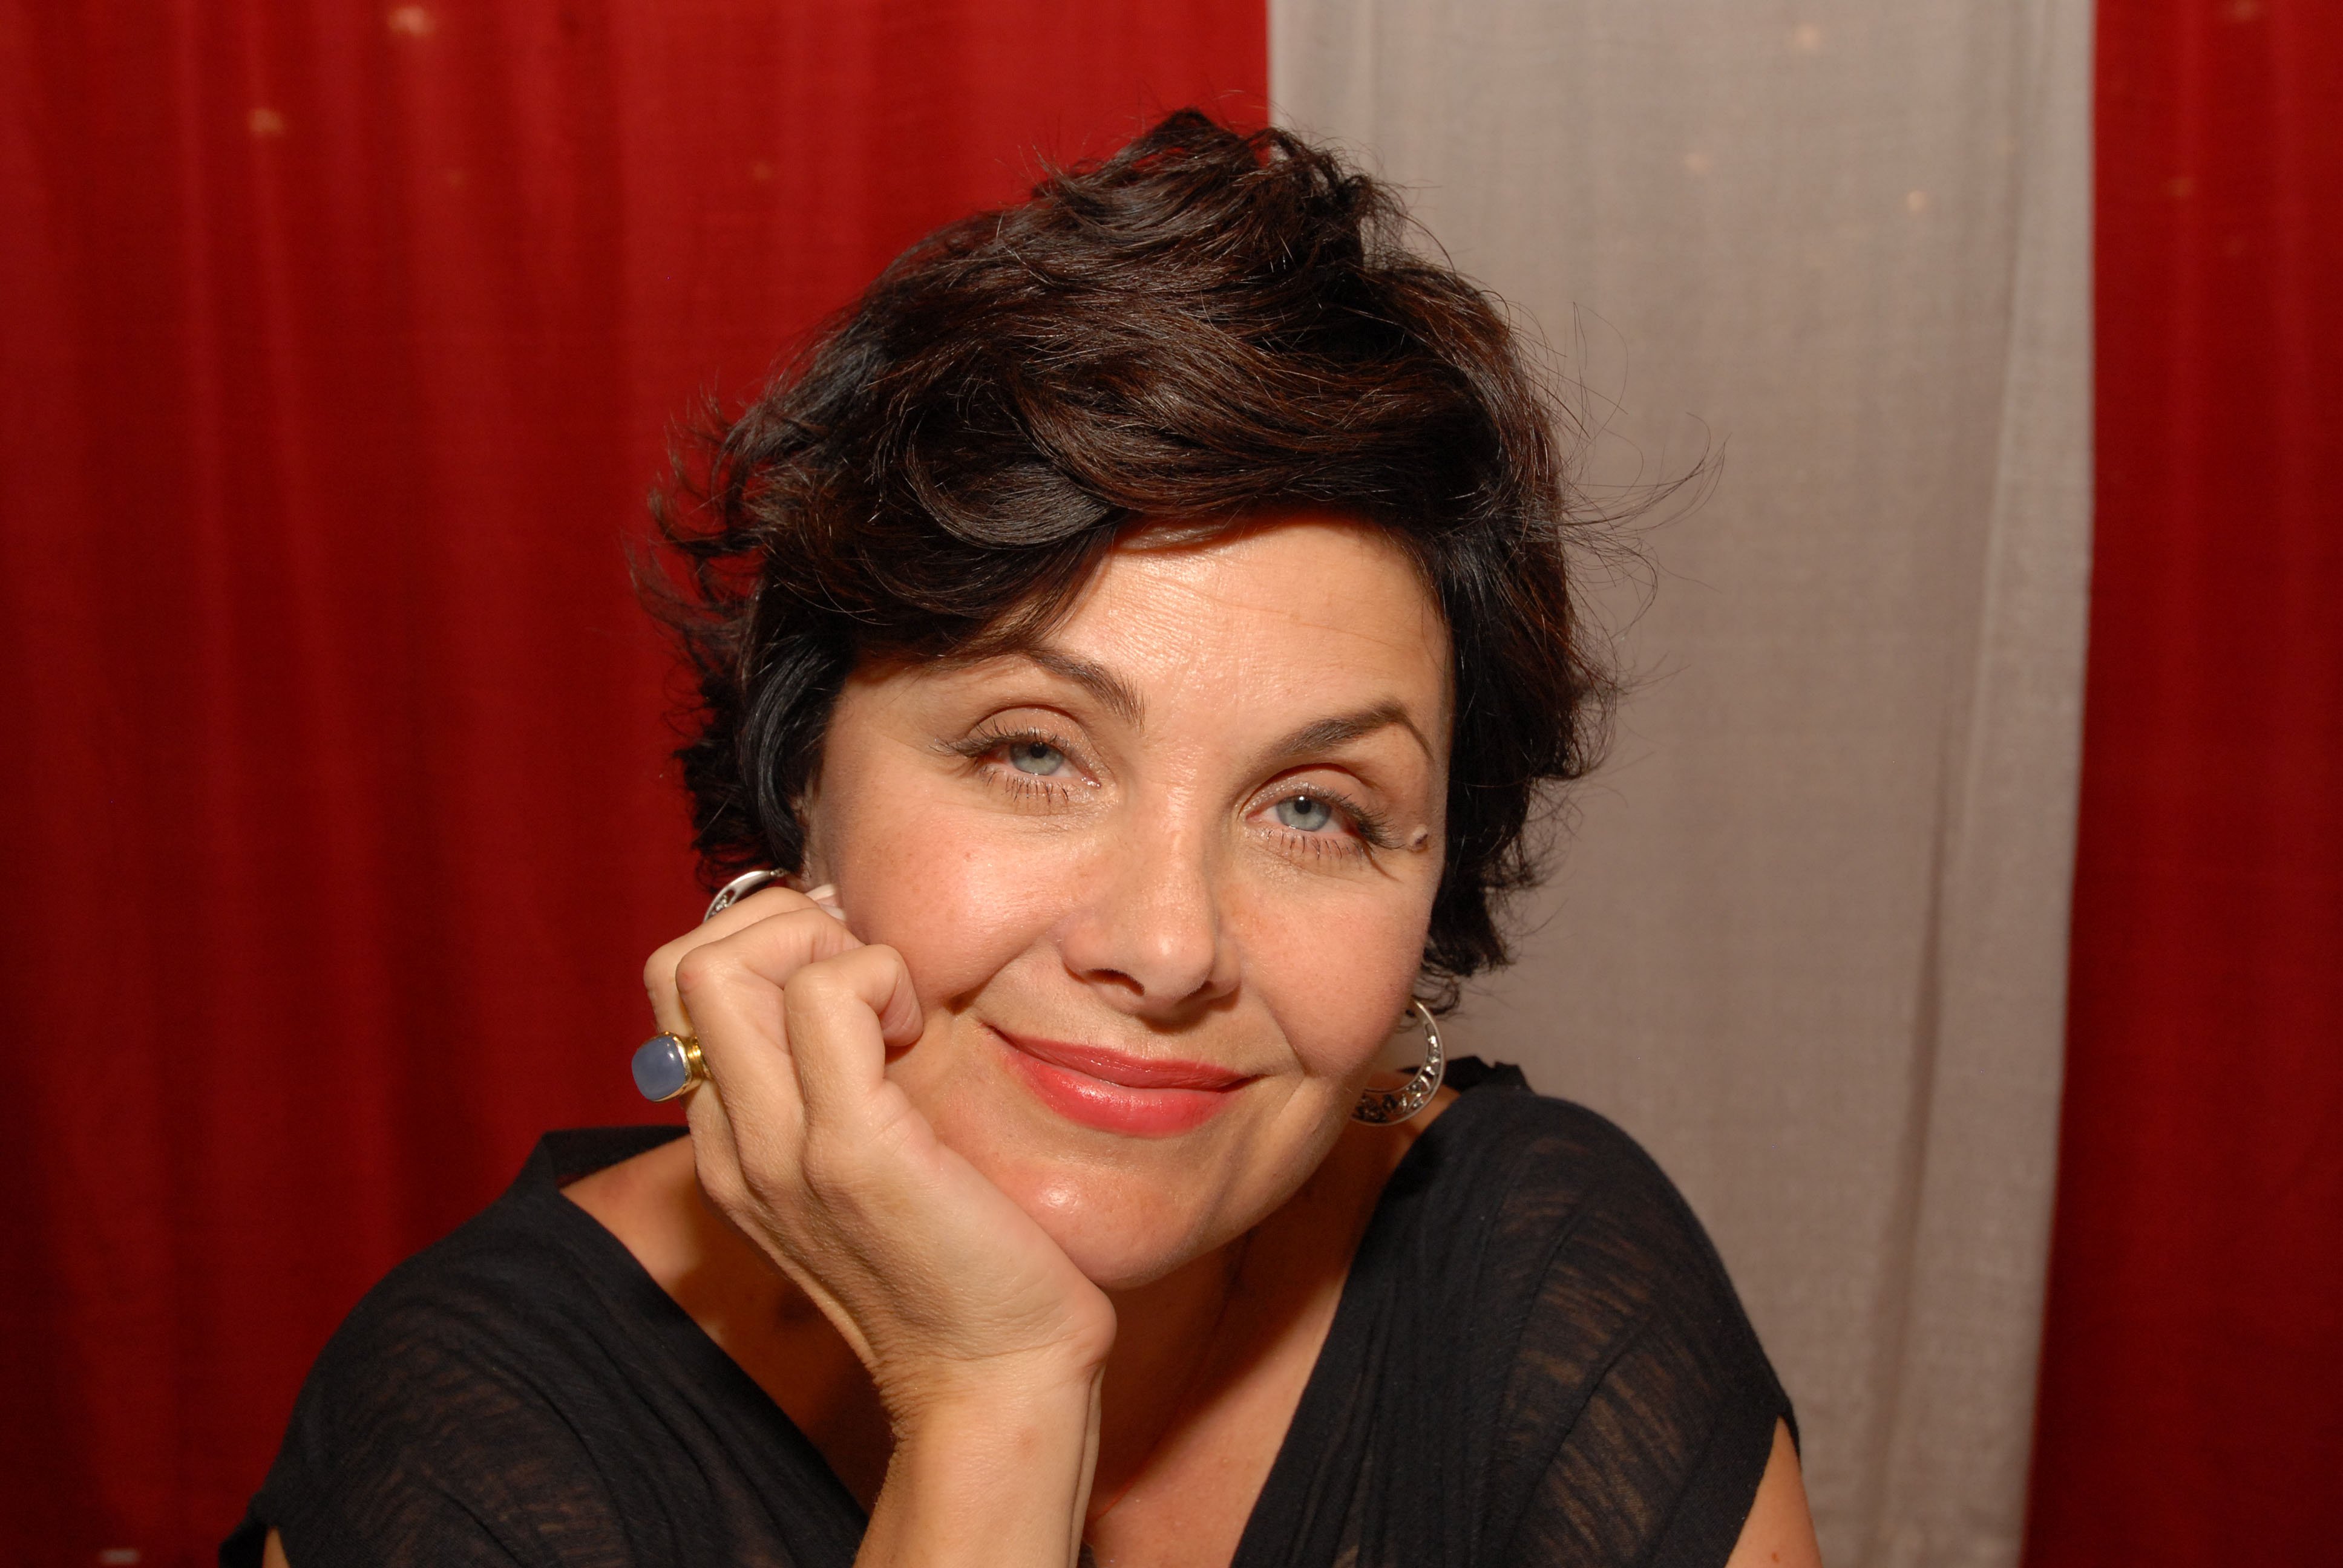 Sherilyn Fenn appears at day 1 of Motor City Comic Con 2012. Fenn portrayed Anna Nardini during season 6 and 7 of 'Gilmore Girls'